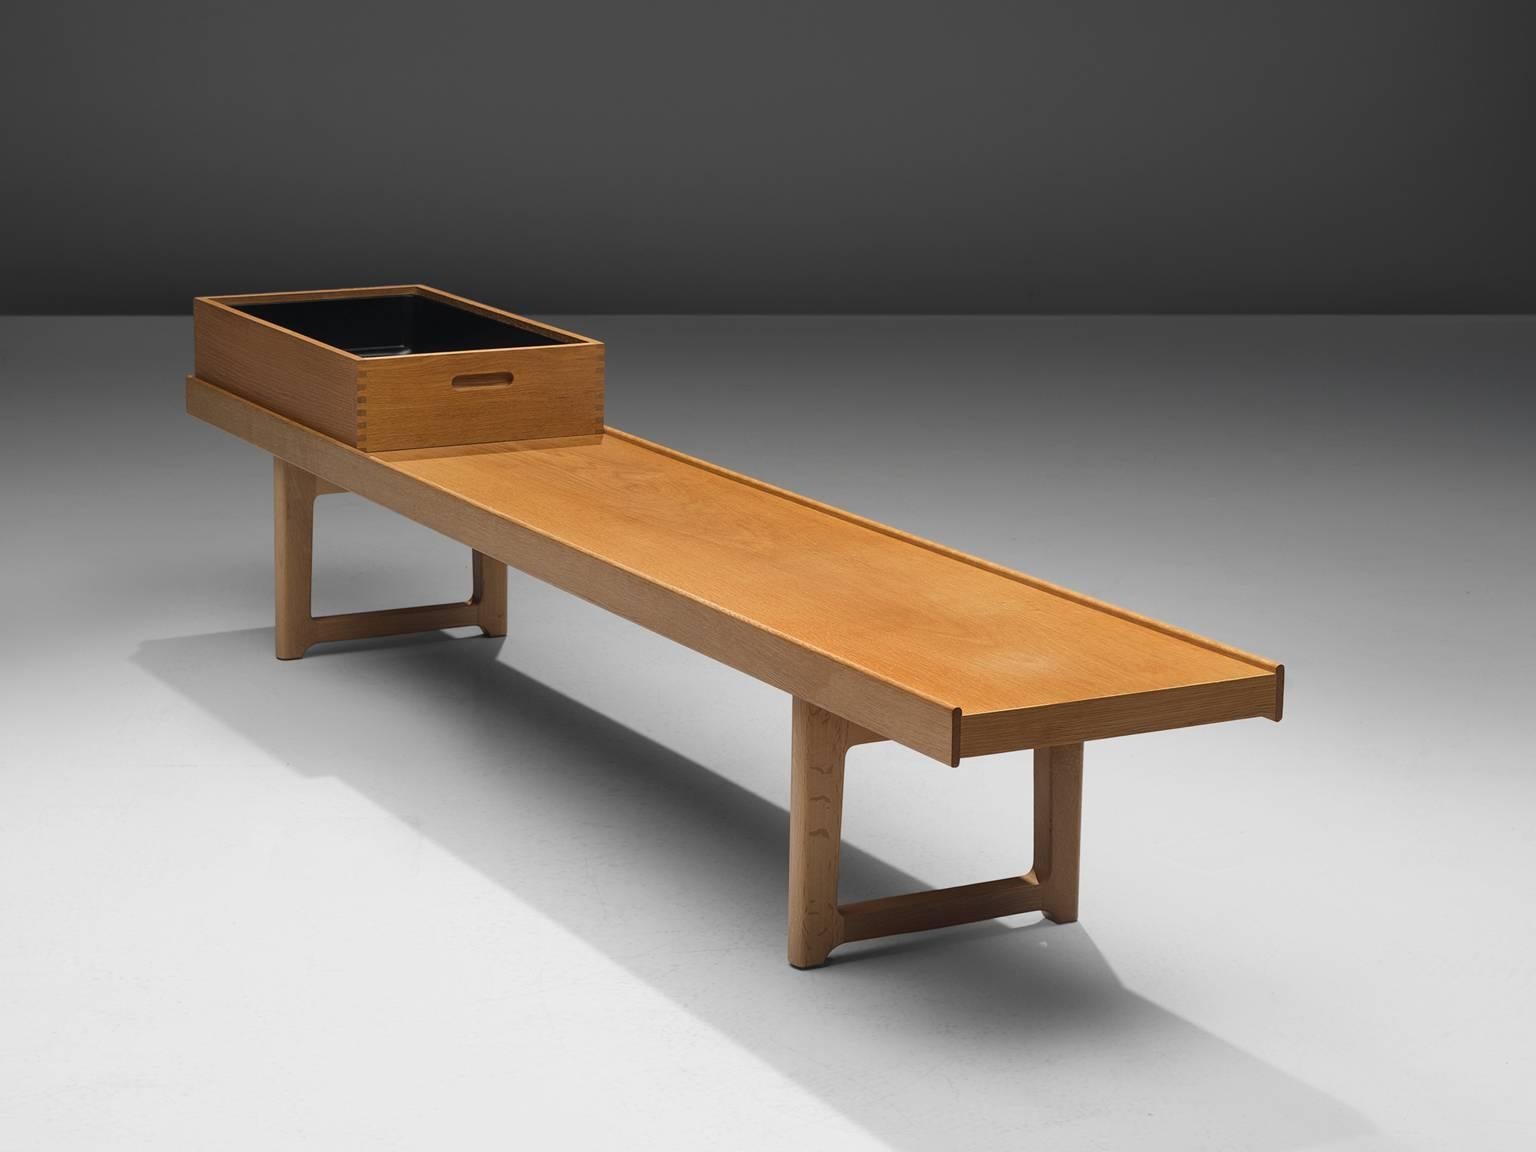 Torbjørn Afdal for Burksbo Mellemstrands Trevareindistri AS, 'Krobo' bench, oak, Norway, 1960s

This classic bench by Afdal is executed in oak and comes with one tray. The piece is stamped manufacturer's mark to each element. The piece is one of the